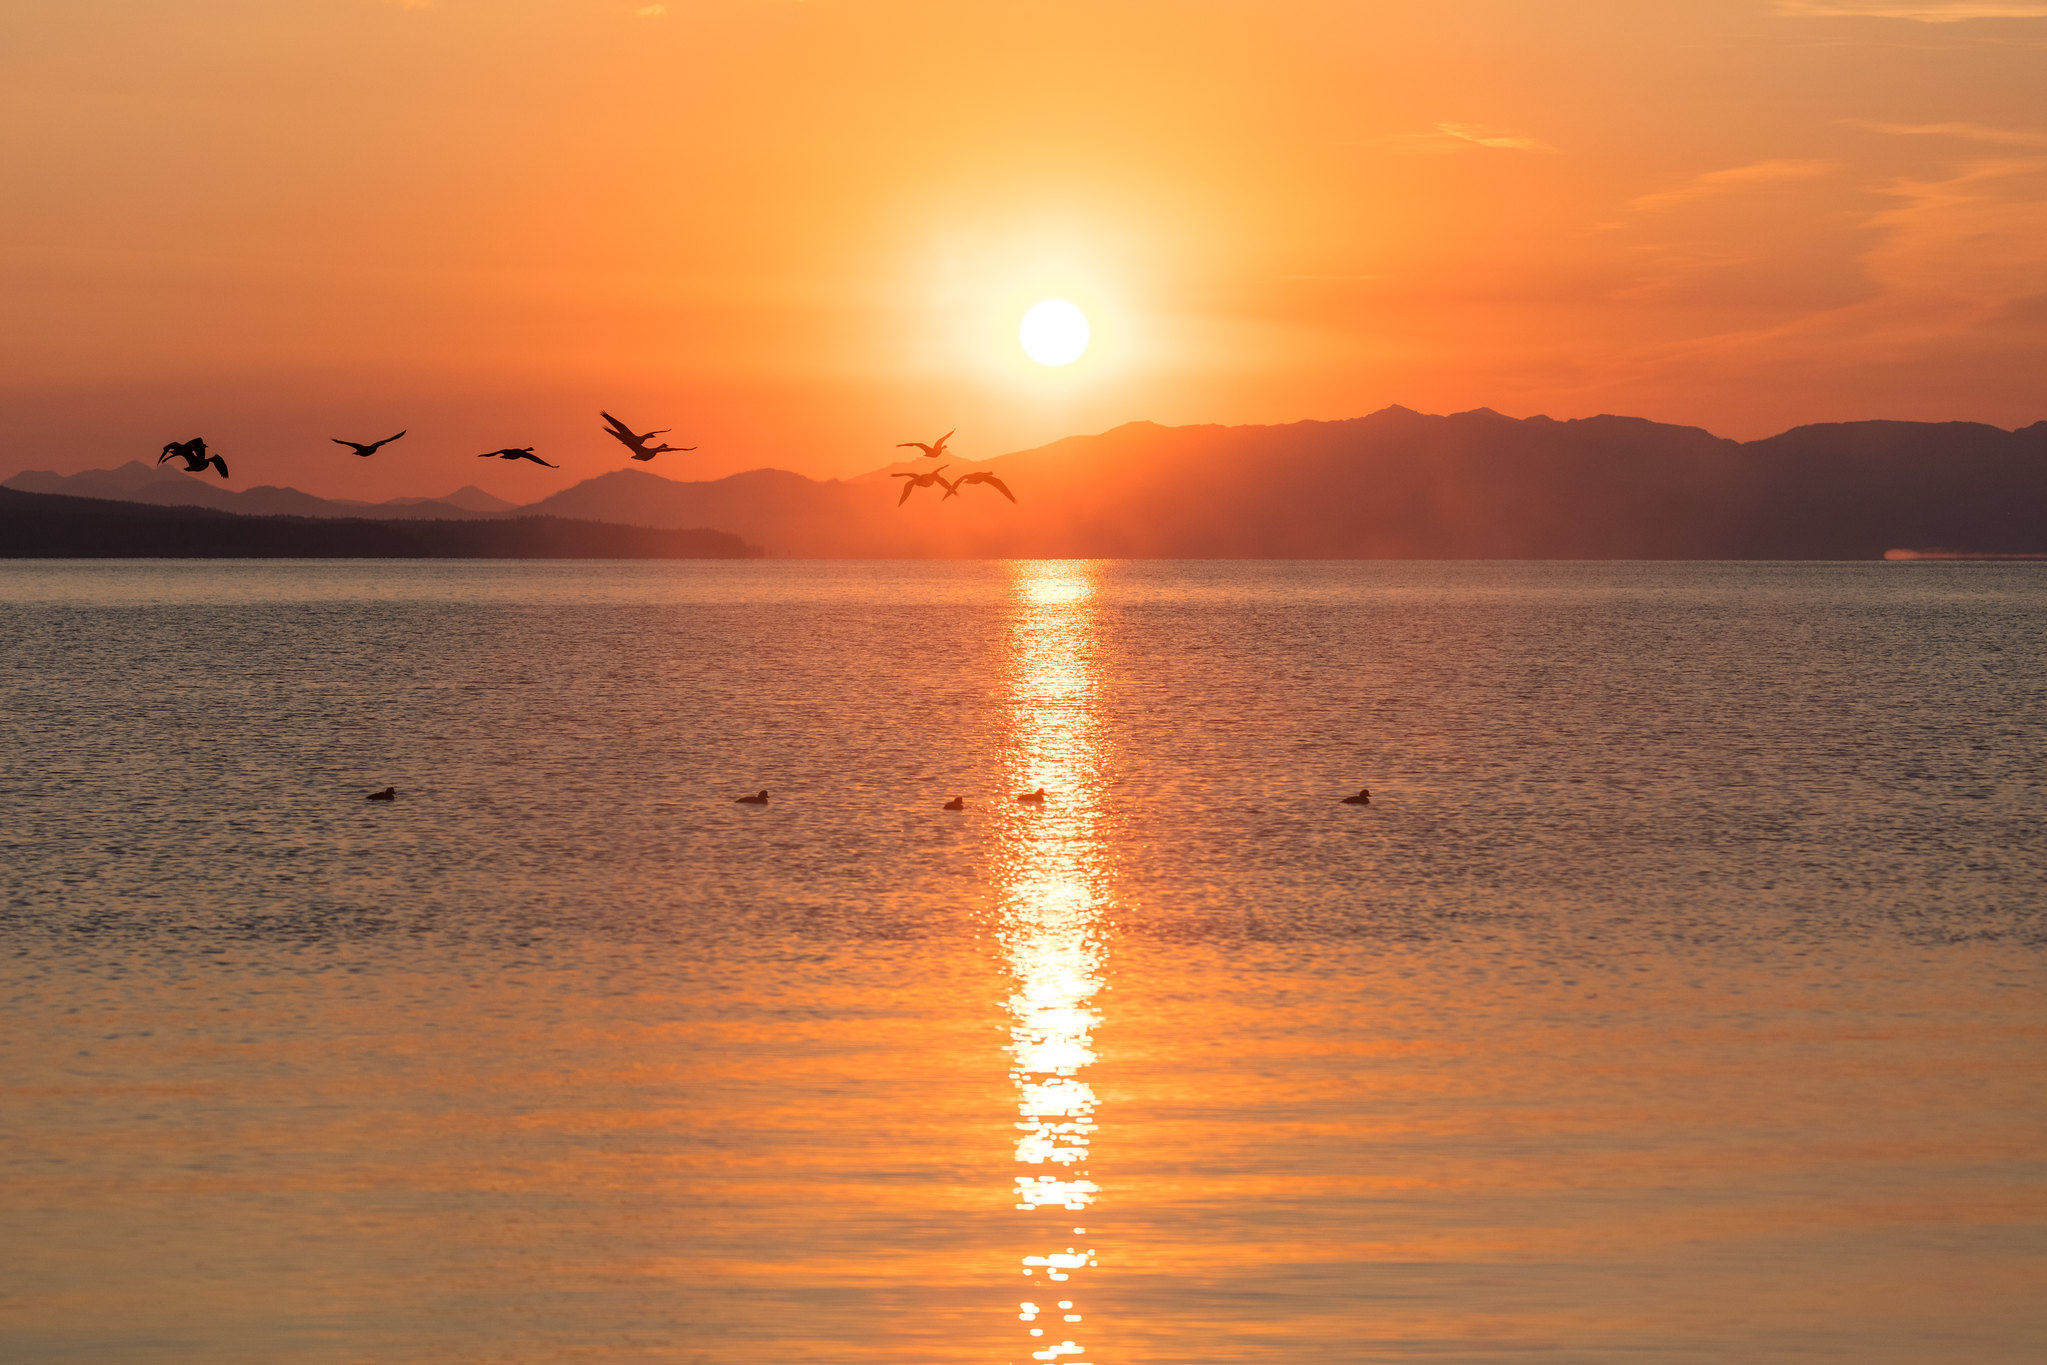 The sun rises over the mountains and reflects on a large lake. Birds fly in the morning light.